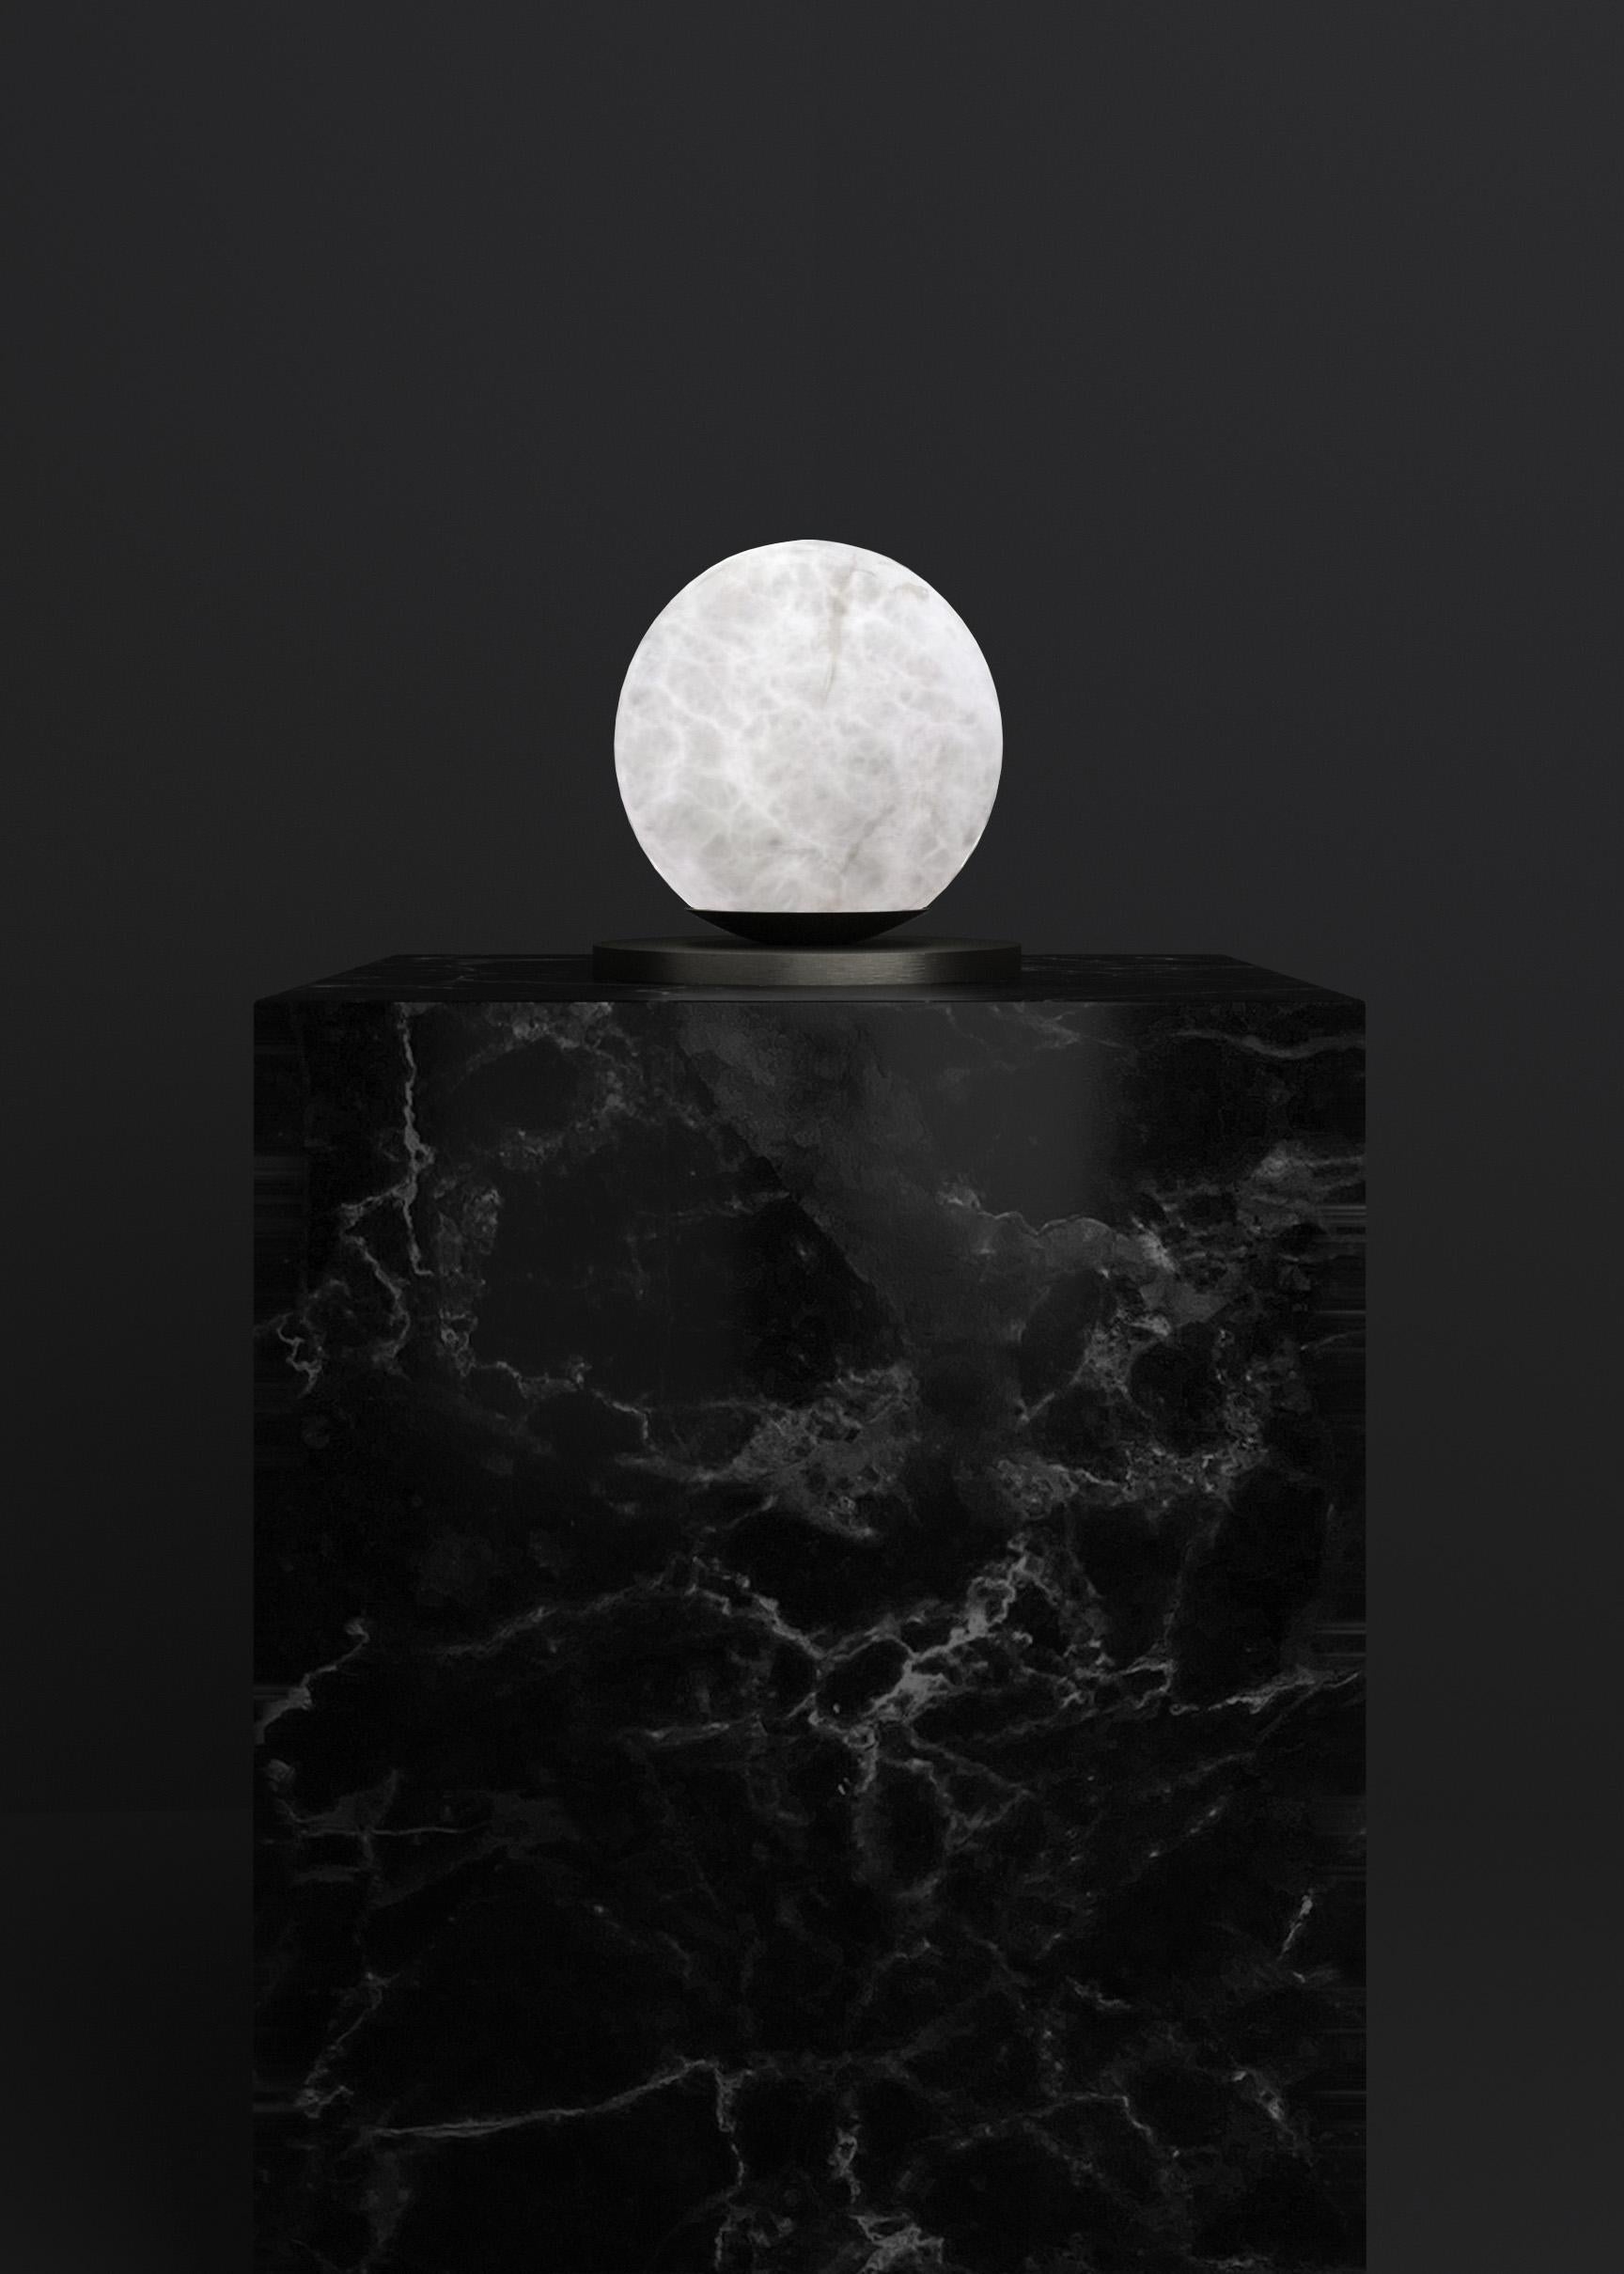 Ofione Brushed Black Metal Table Lamp by Alabastro Italiano
Dimensions: D 16 x W 16 x H 16 cm.
Materials: White alabaster and metal.

Available in different finishes: Shiny Silver, Bronze, Brushed Brass, Ruggine of Florence, Brushed Burnished, Shiny